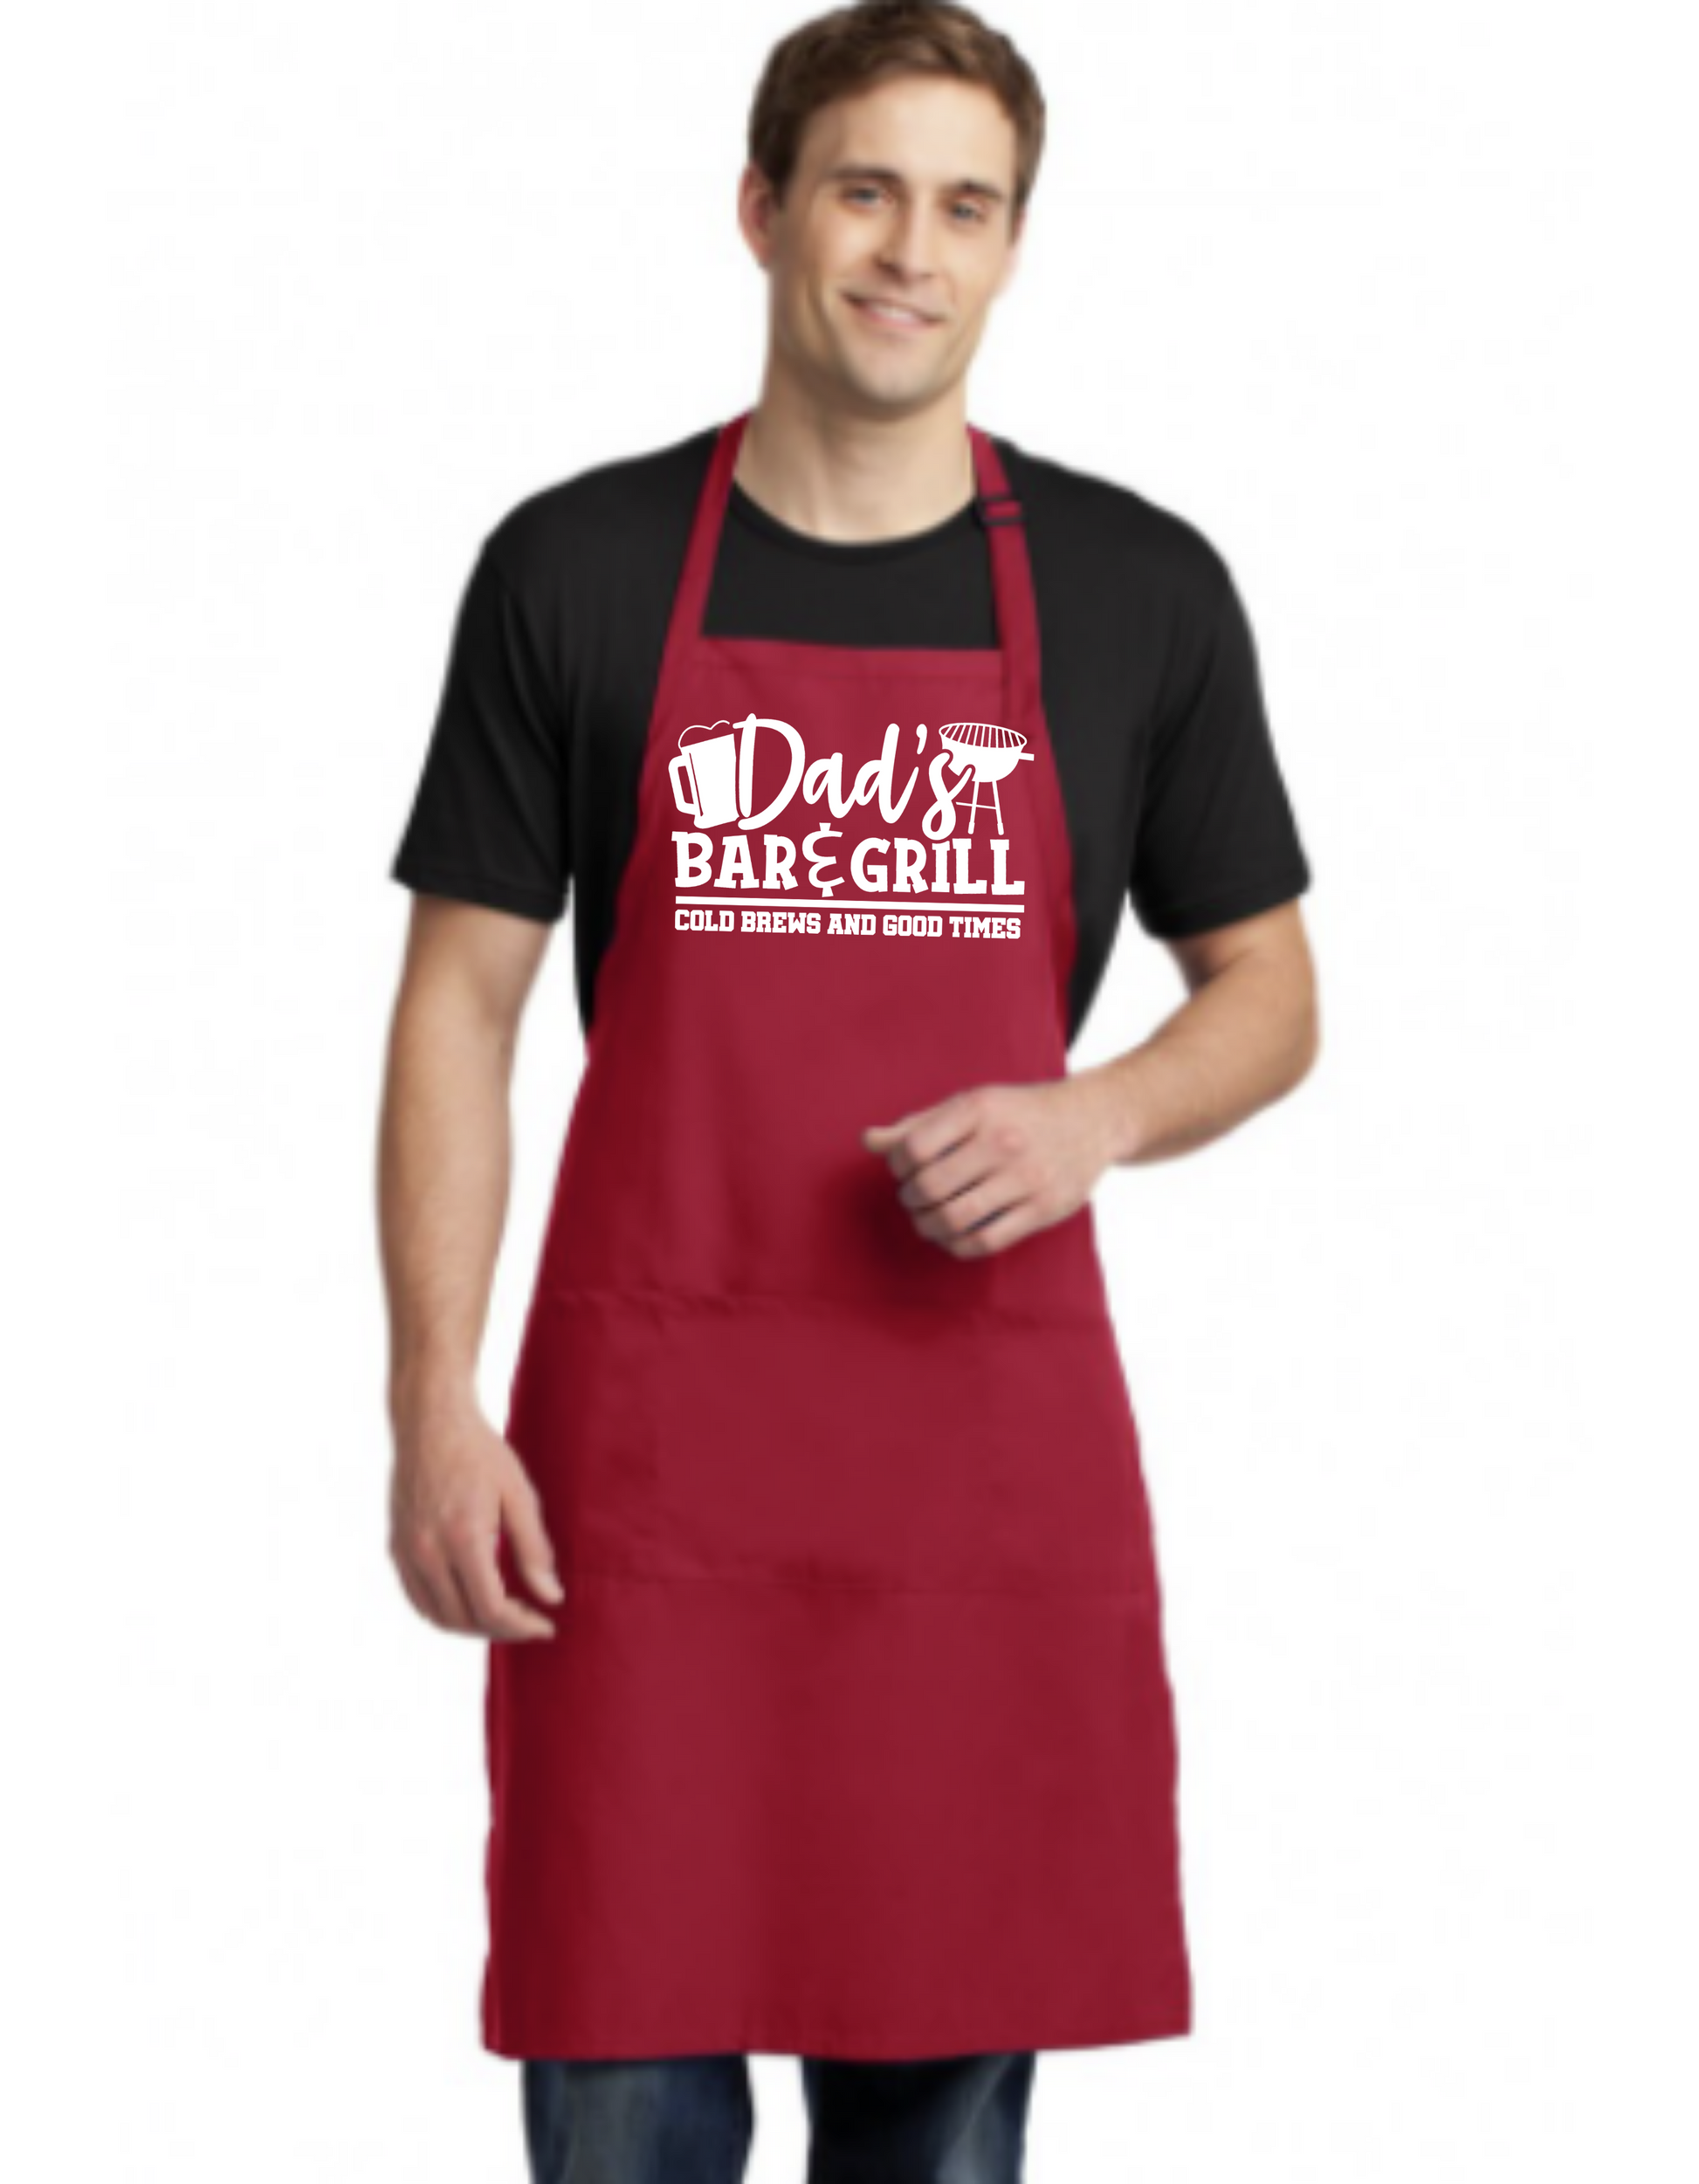 Dad's Bar and Grill - Great Gift - Commercial Grade - Mister Snarky's